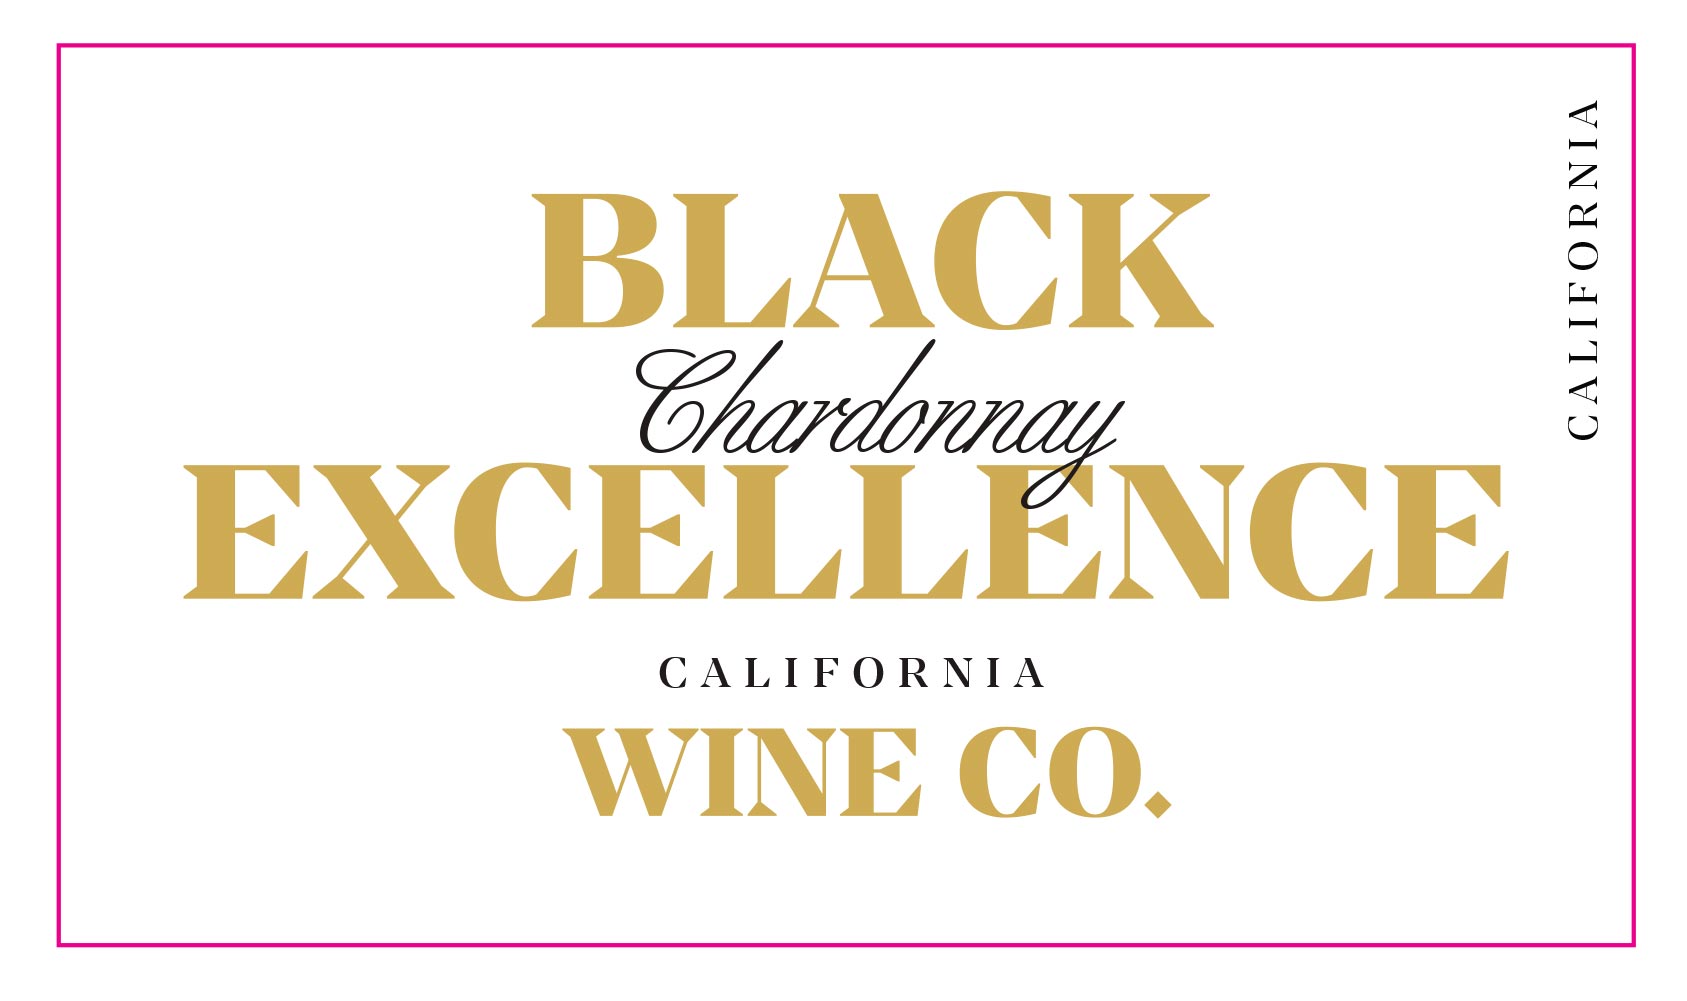 Chardonnay Wine for sale, Black Excellence Wine Co California